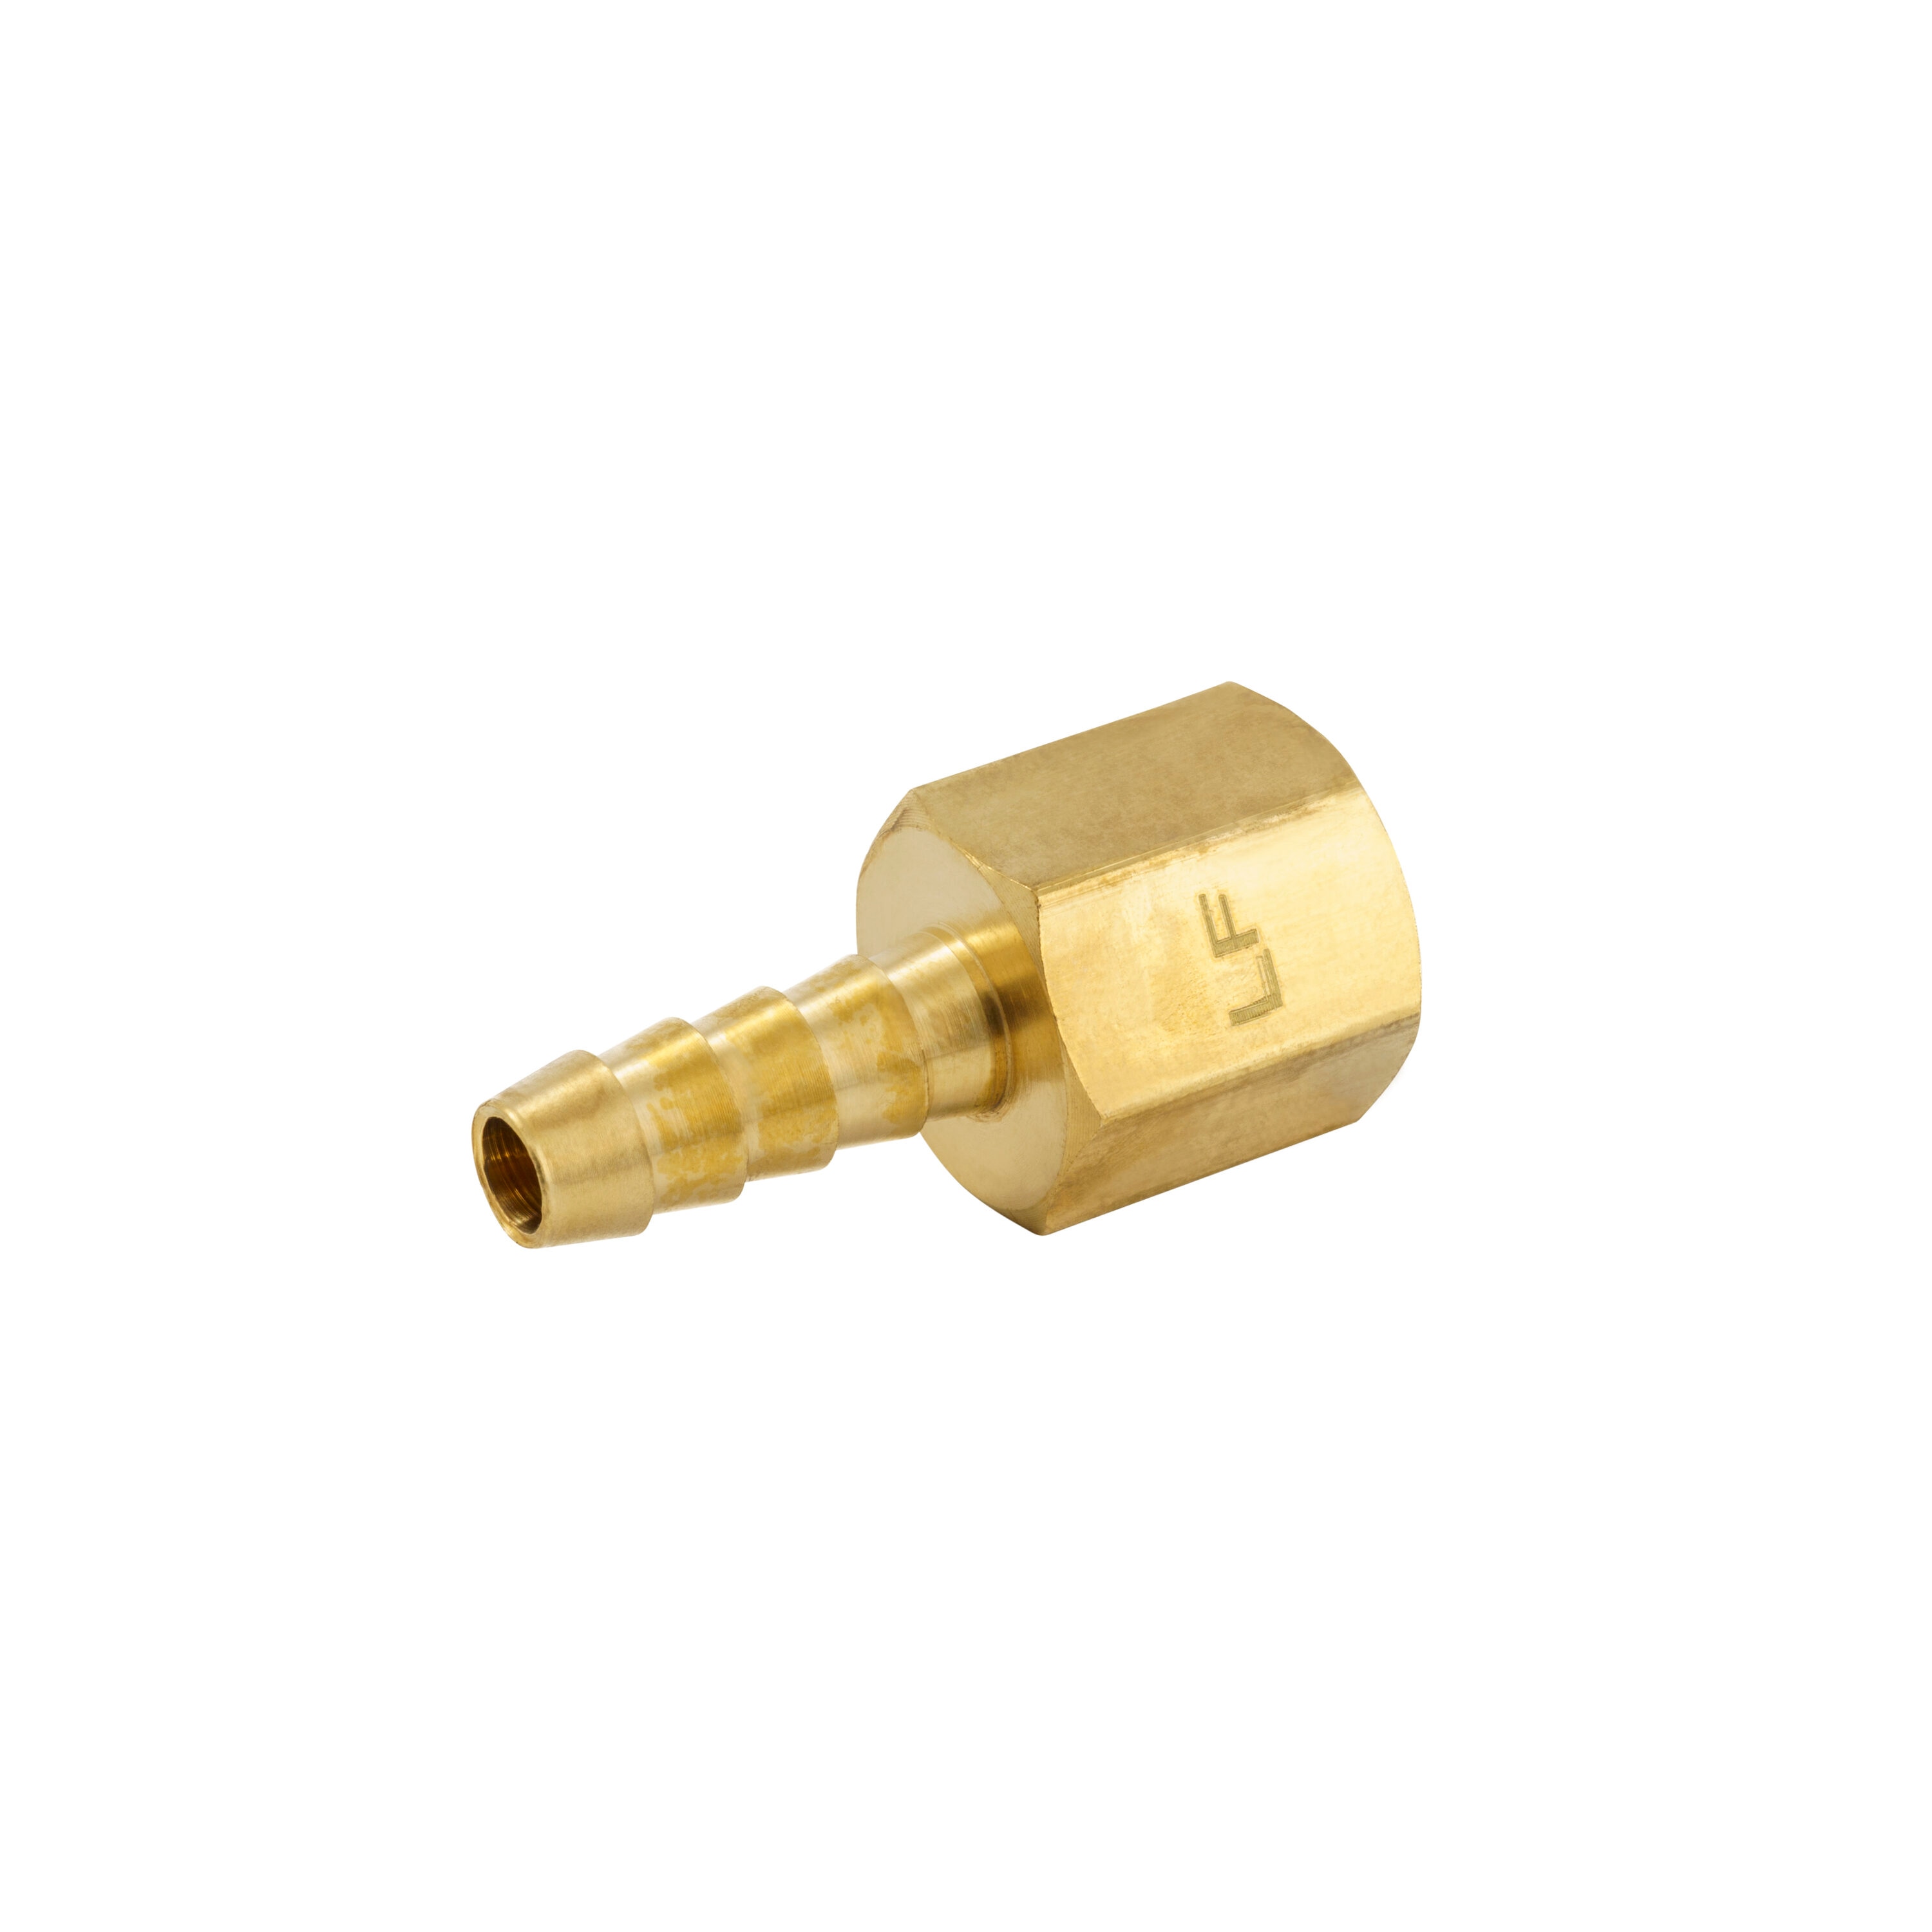 Proline Series 1/2-in x 1/2-in Barbed Adapter Fitting in the Brass